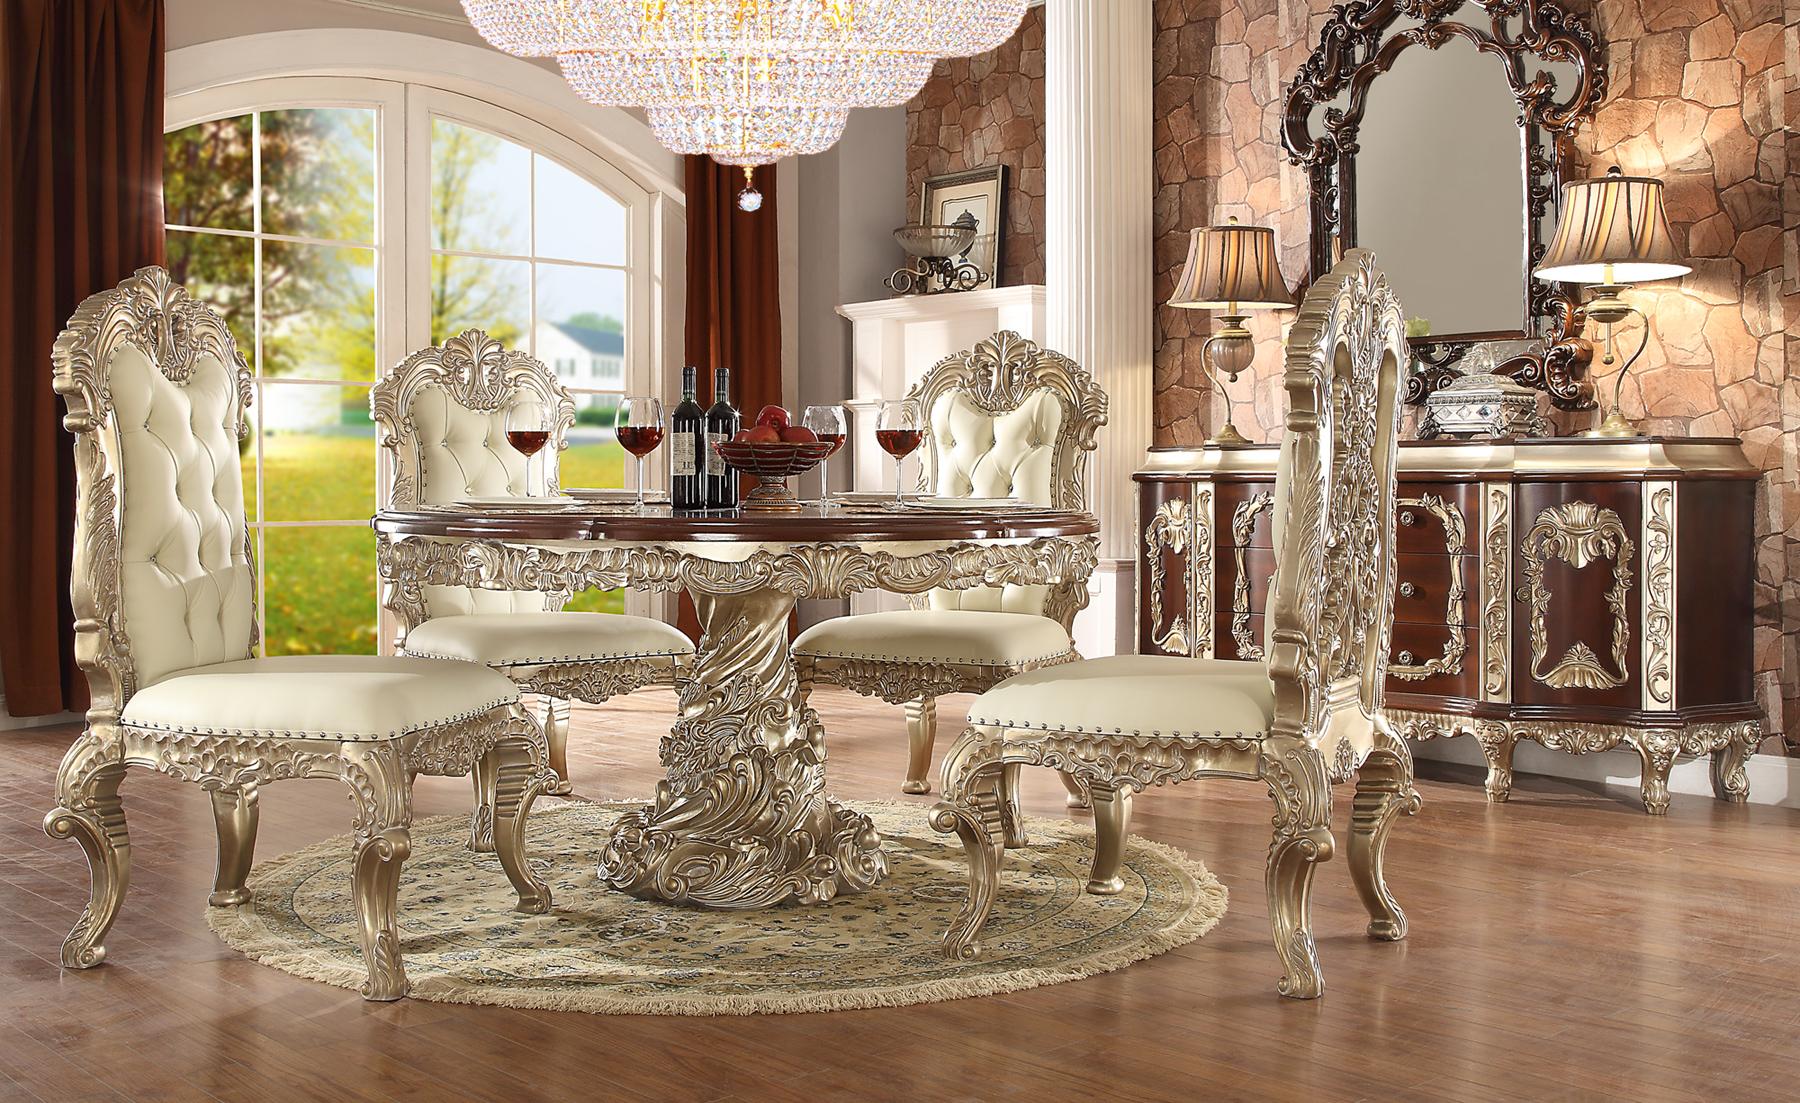 Traditional Dining Table Set HD-8017 – 7PC DINING TABLE SET HD-D8017-ROUND-7PC in Antique White, Silver Faux Leather